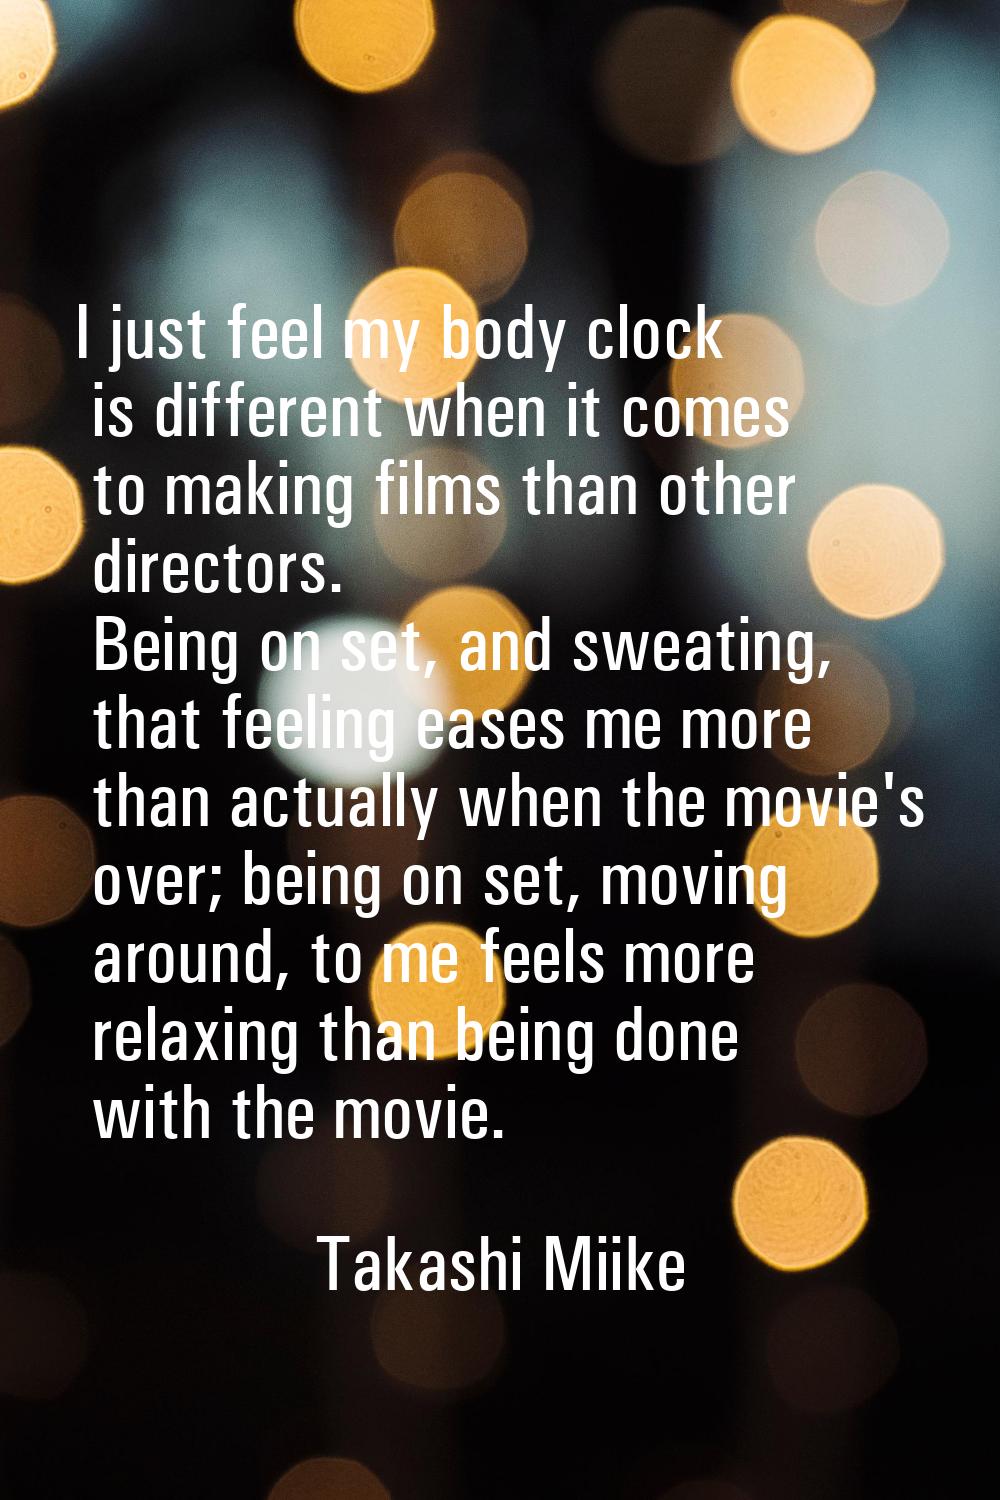 I just feel my body clock is different when it comes to making films than other directors. Being on